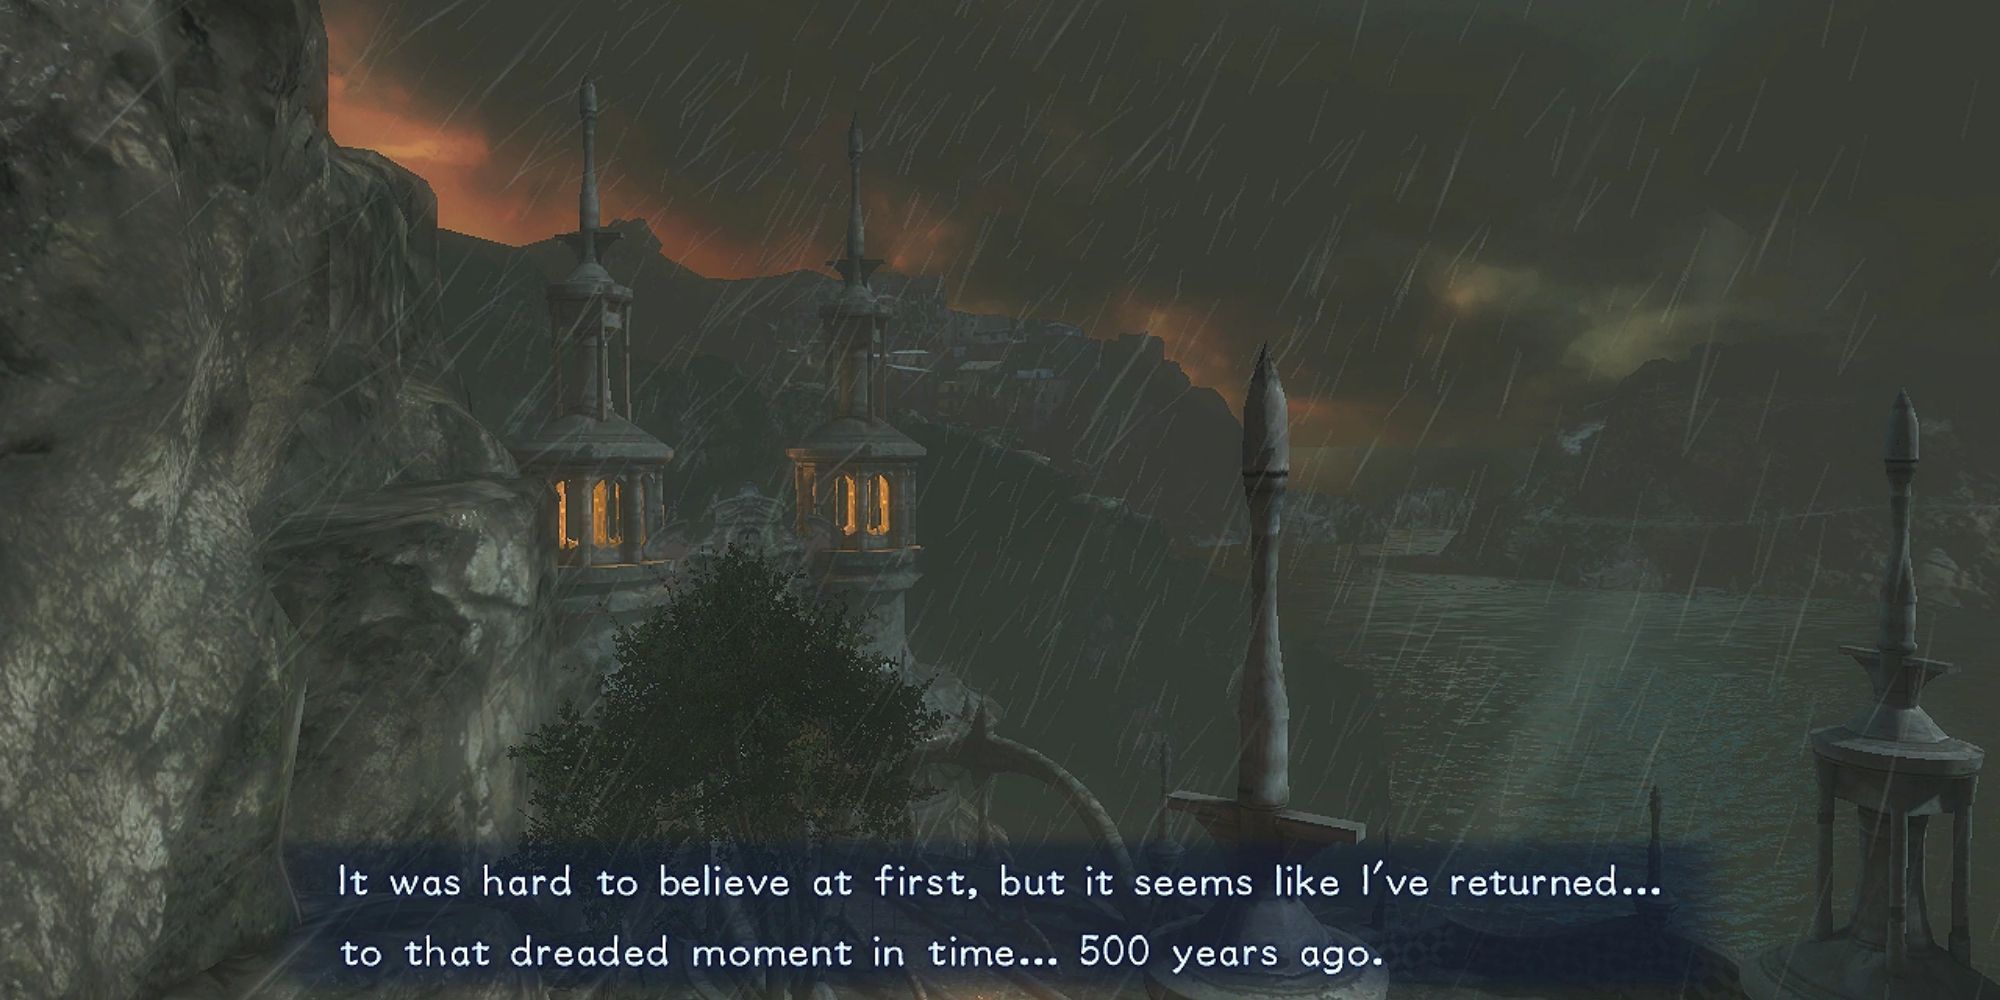 A screenshot of Bayonetta 2, when Bayonetta travels back in time to Vigrid torn apart by war. The camera surveys the burning city while her narration reflects on her journey